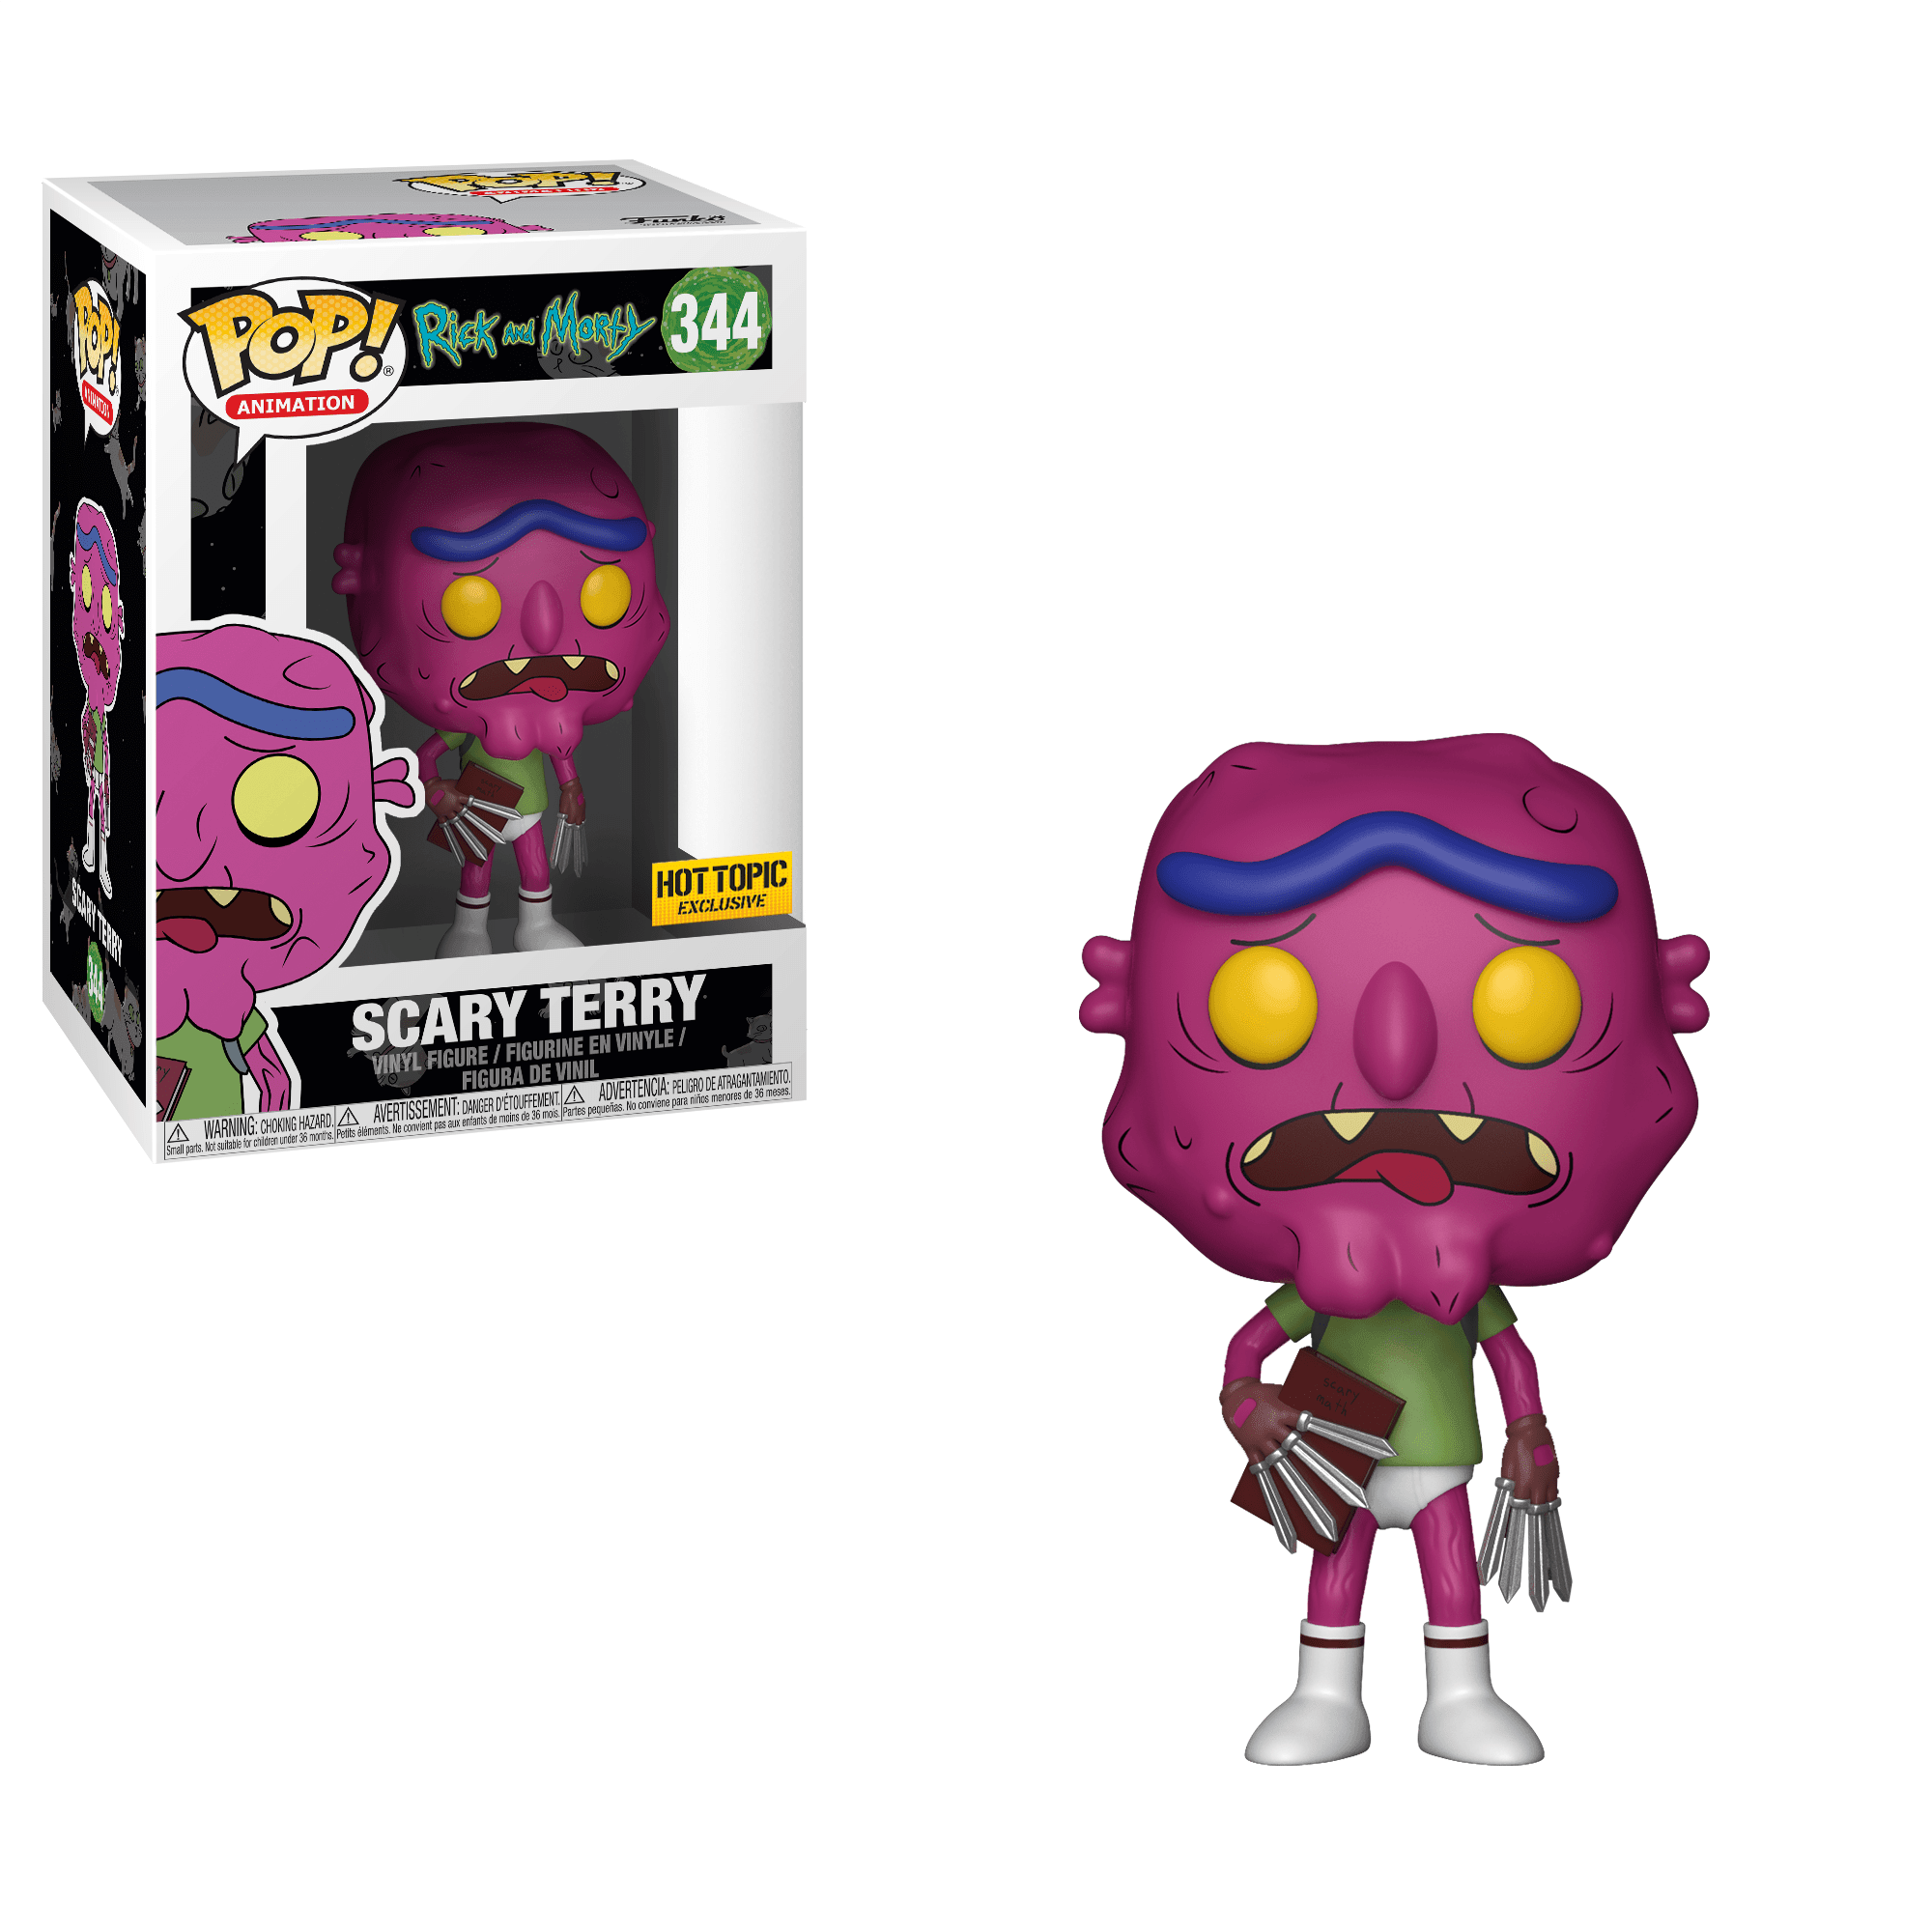 Pop! Animation - Rick And Morty - Scary Terry - #344 - Hot Topic EXCLUSIVE - Hobby Champion Inc